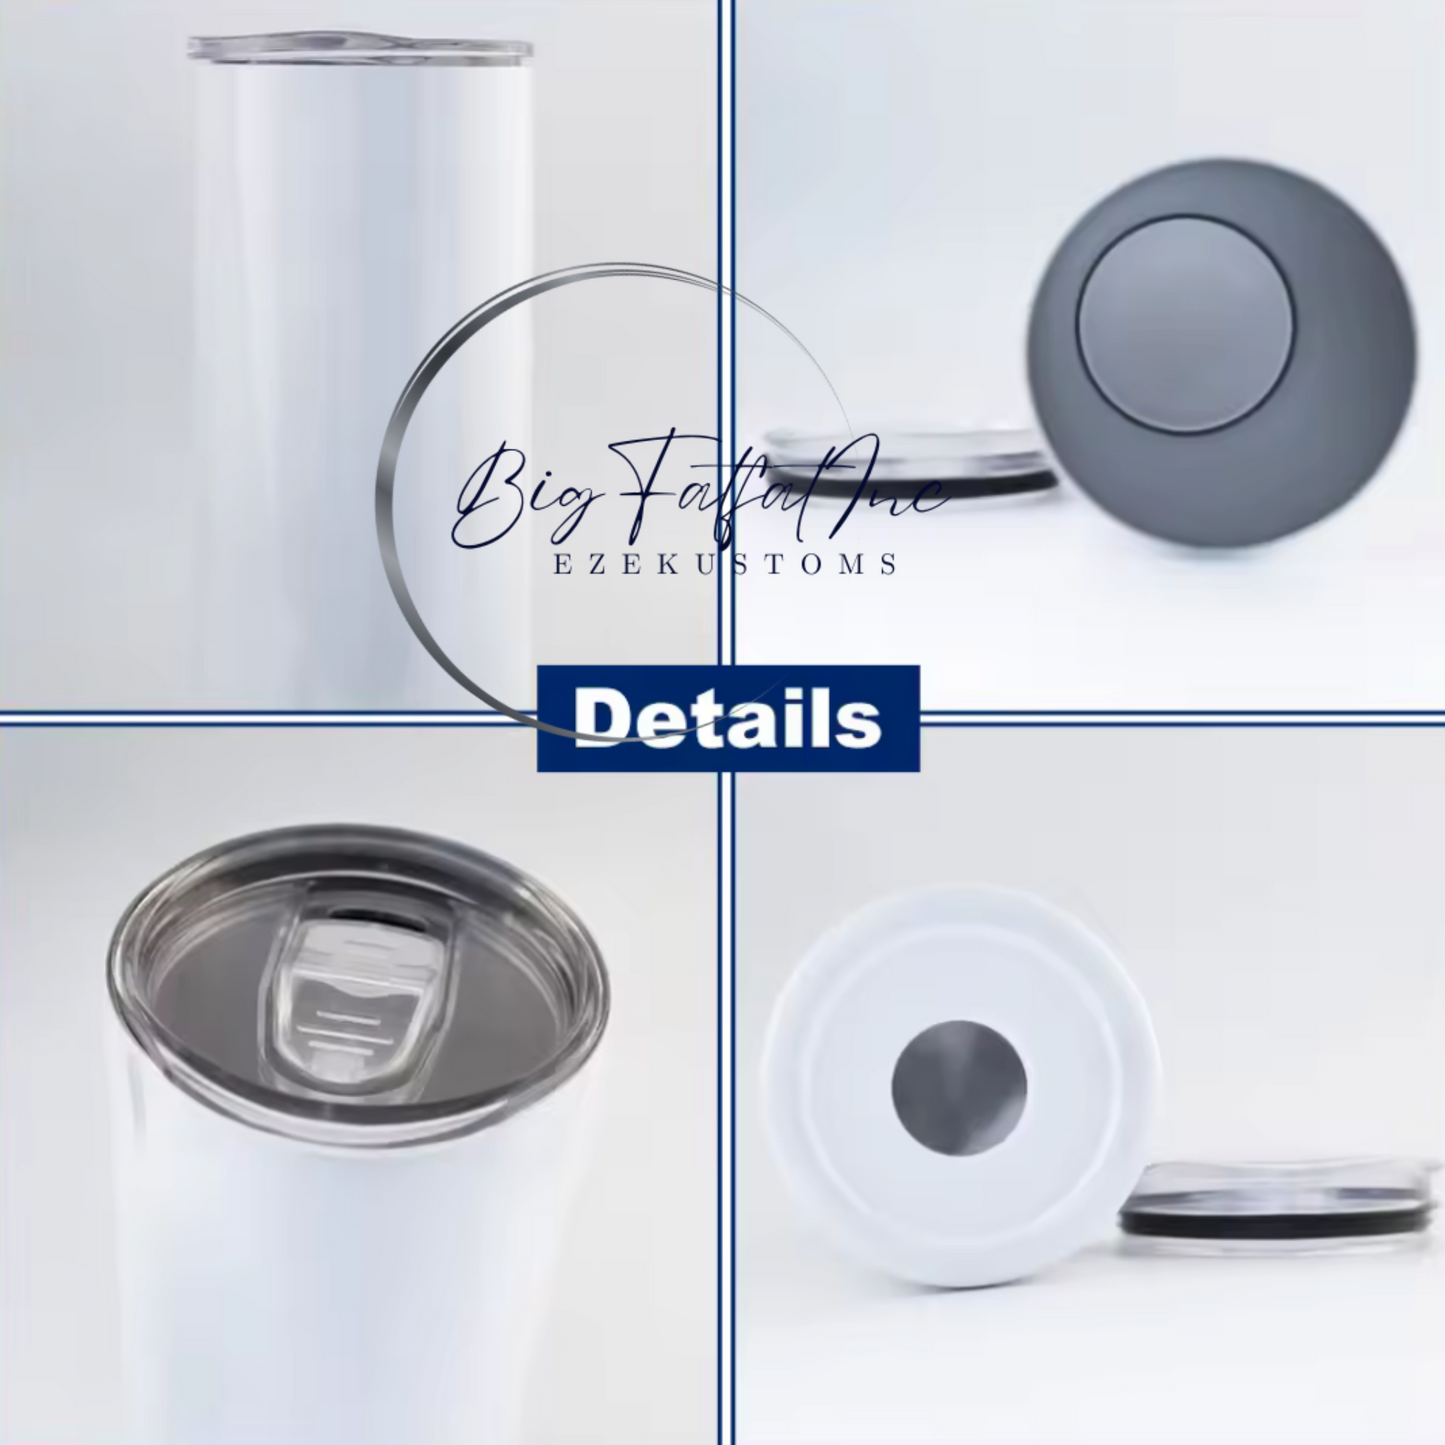 Double Bubble Machine 420 Friendly-20Stainless steel Tumbler